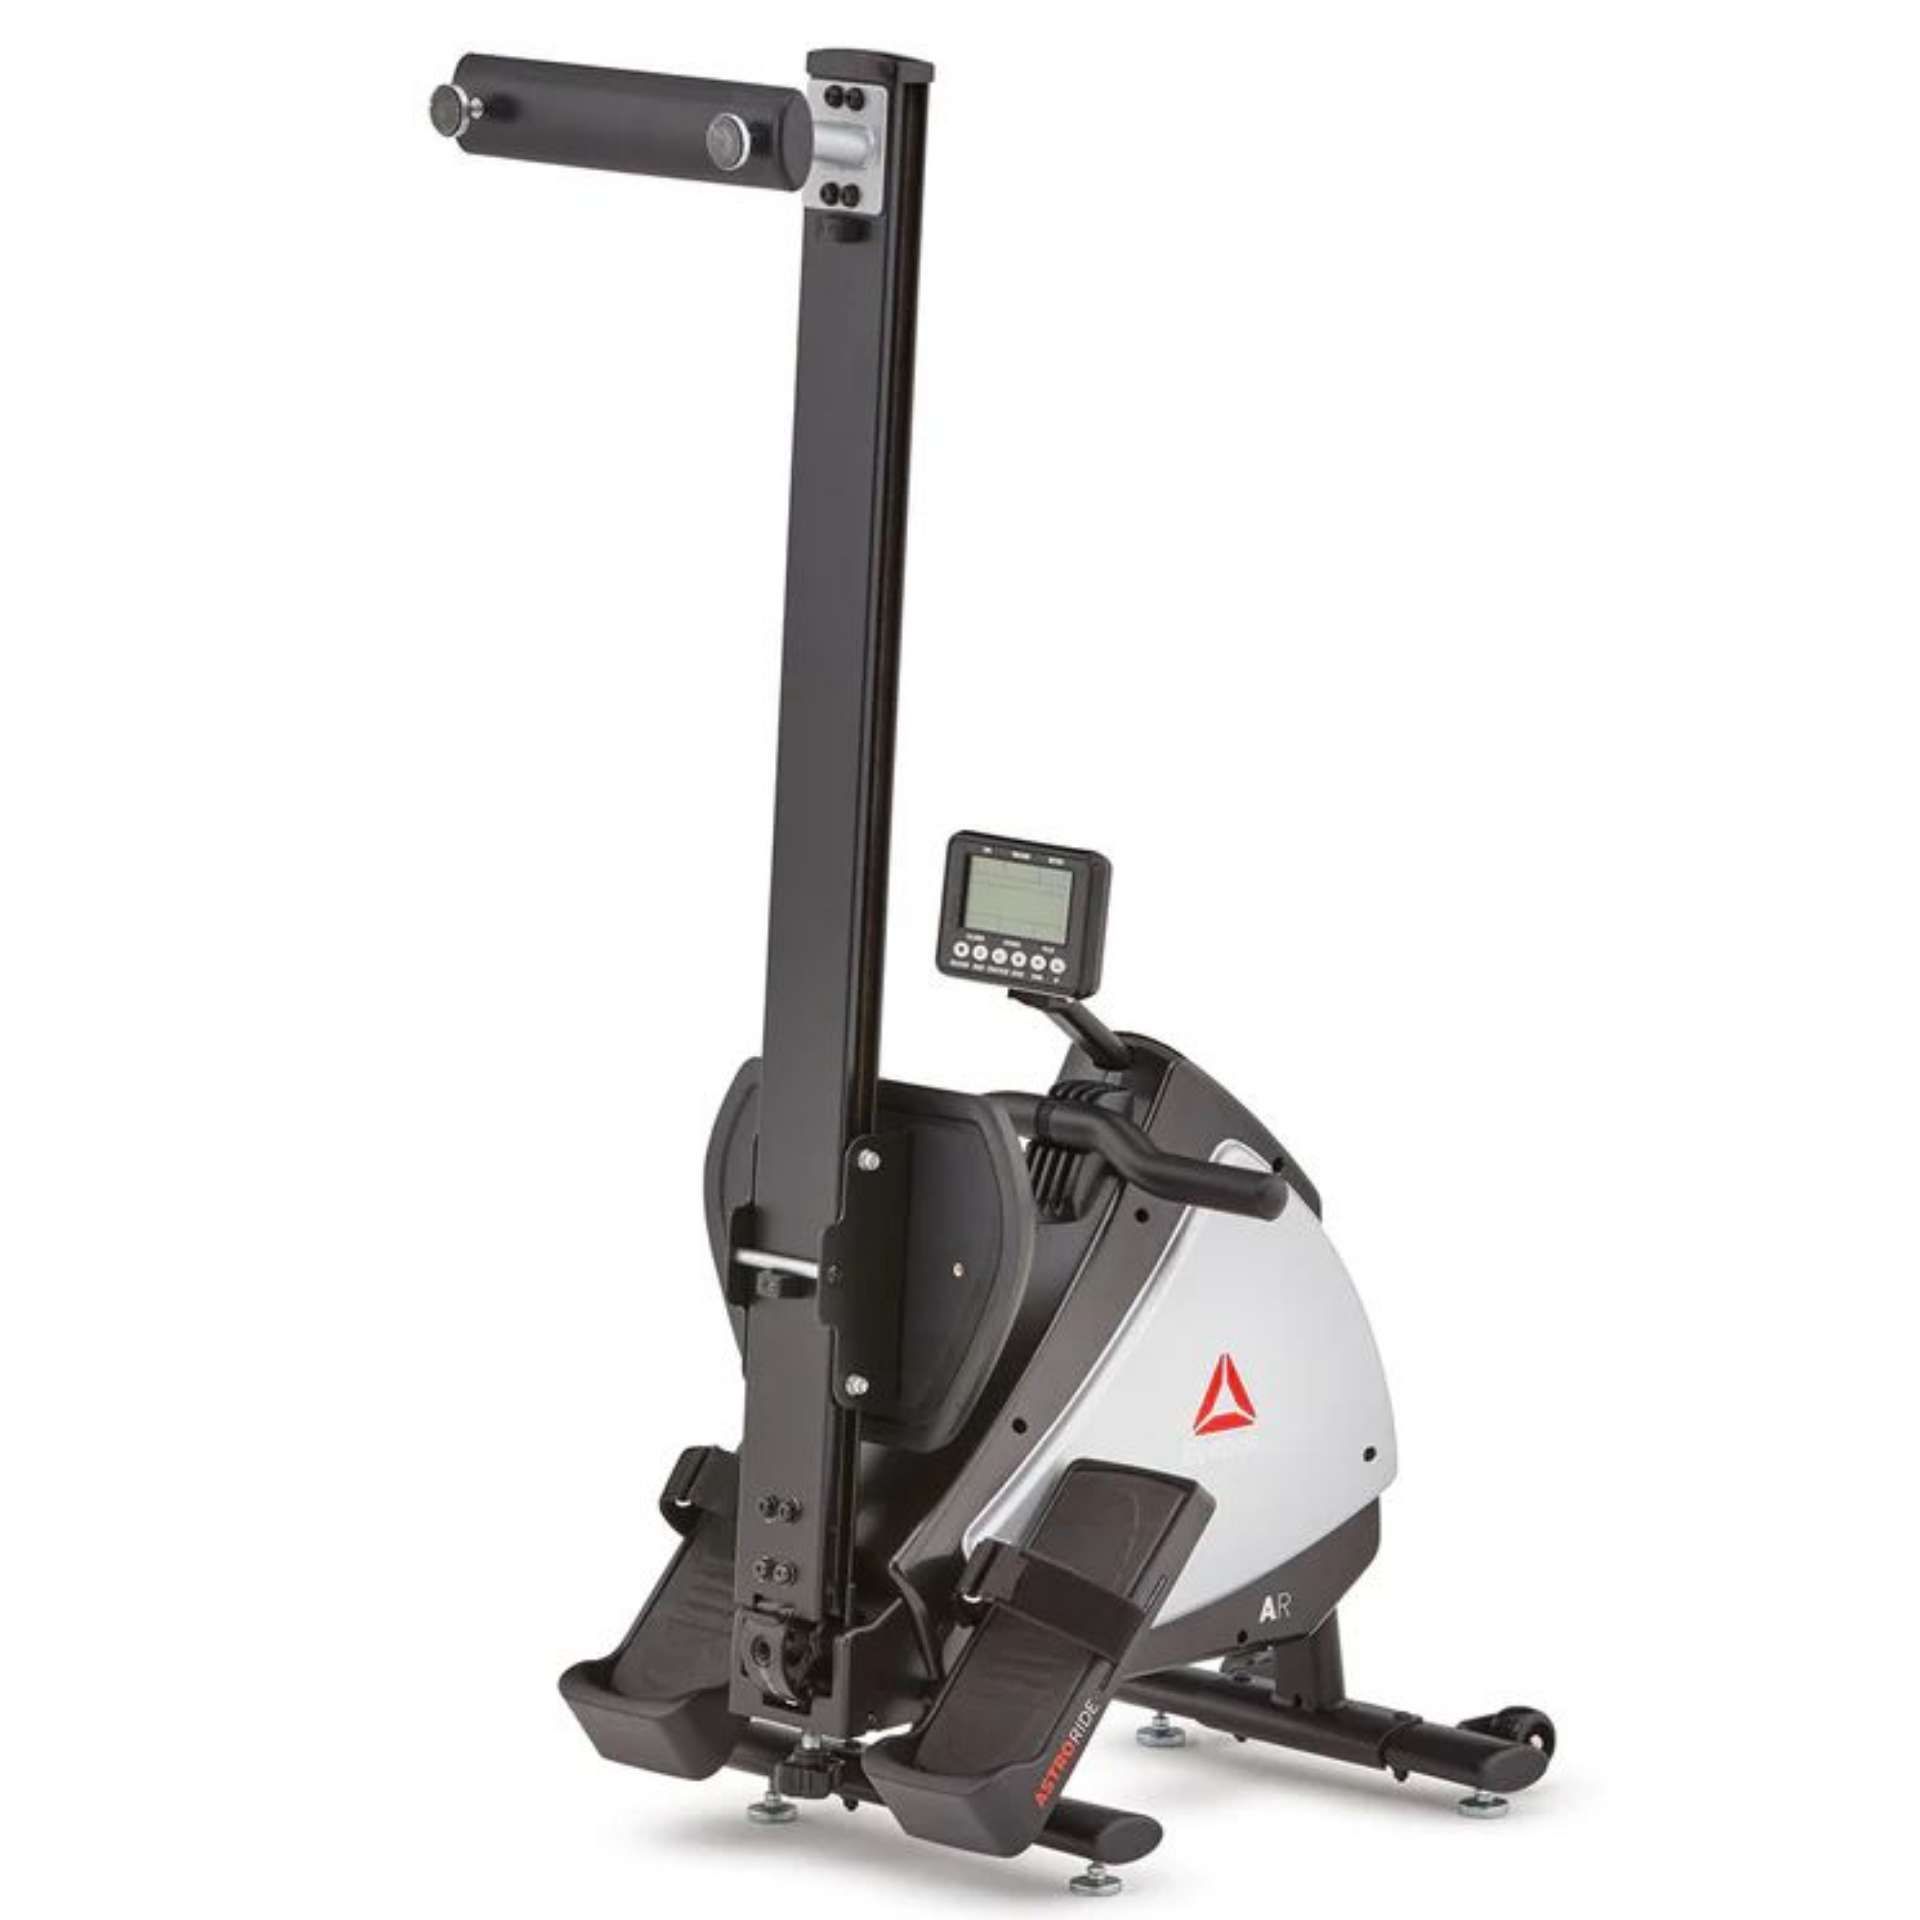 BRAND NEW REEBOK AR Rower. RRP £514.99 EACH R18-2. Designed for you to create more effective and - Image 2 of 4